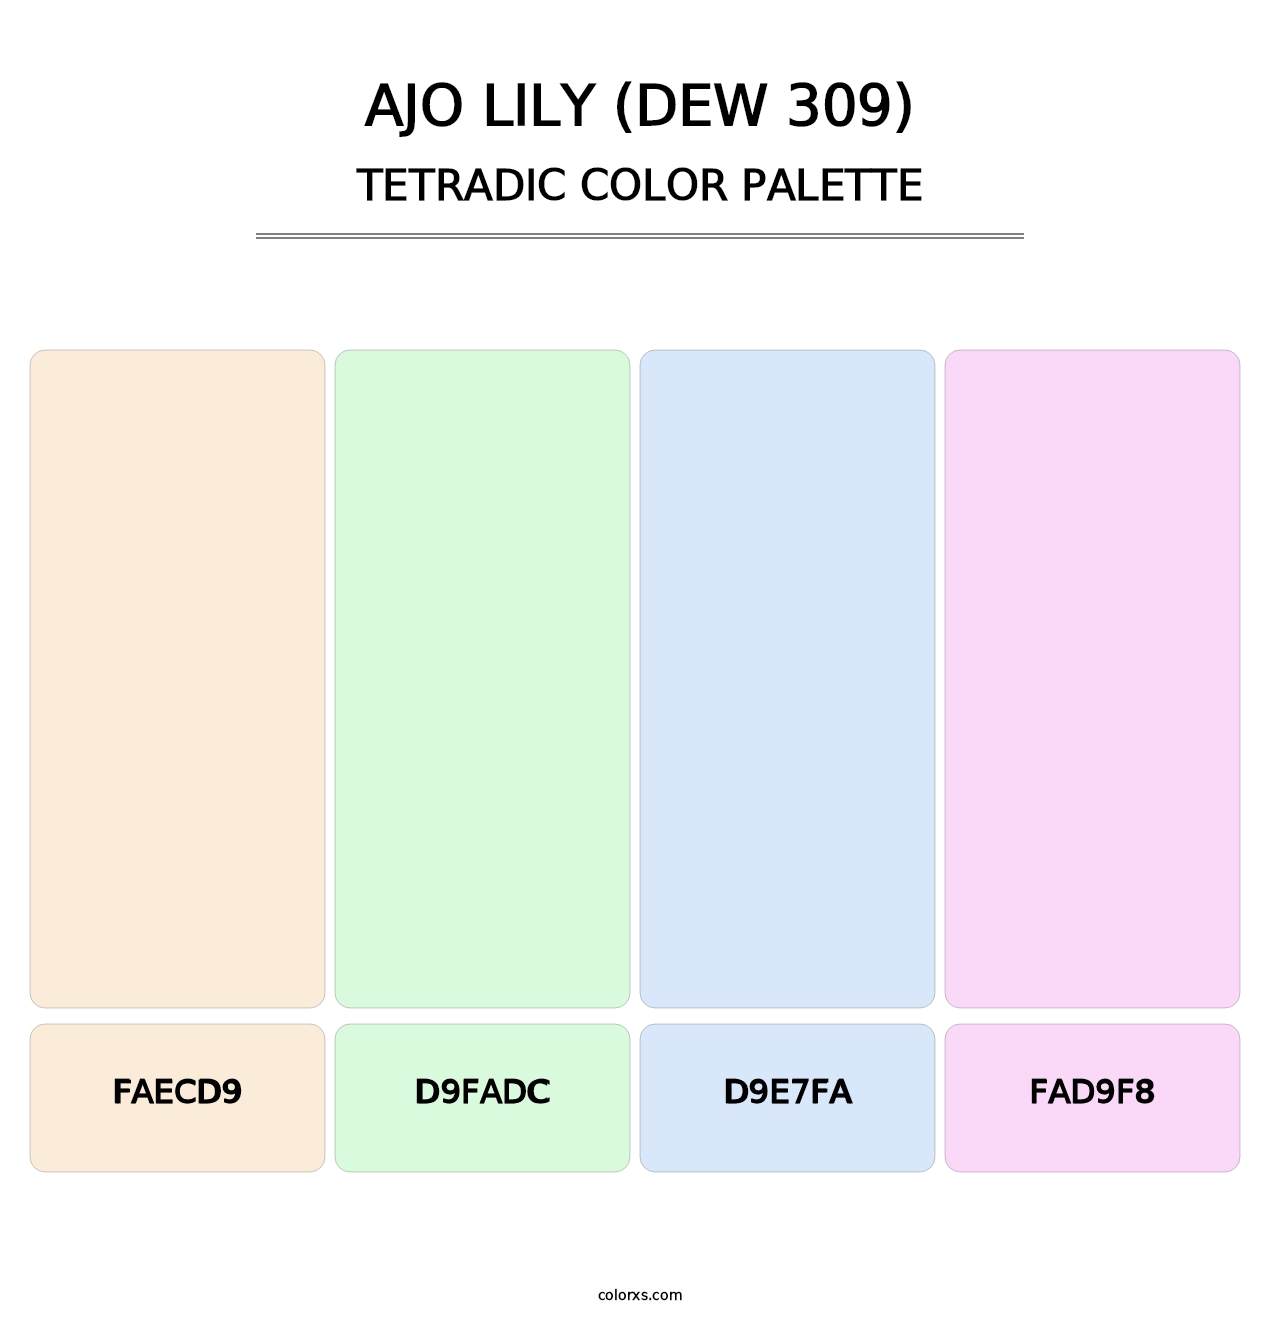 Ajo Lily (DEW 309) - Tetradic Color Palette